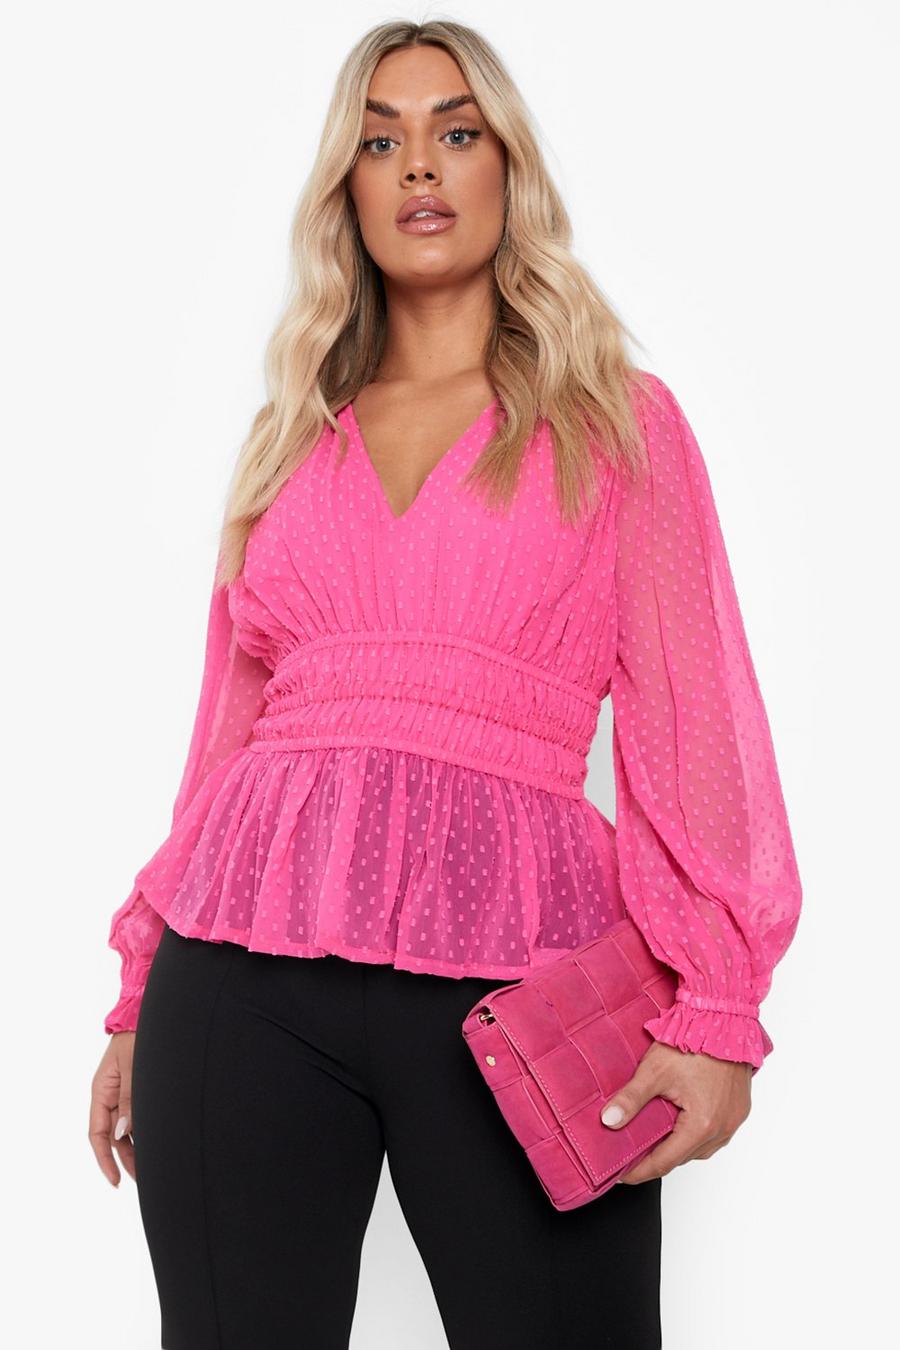 NECHOLOGY Womens Tops Pink plus Size for Women Women's Blouses V